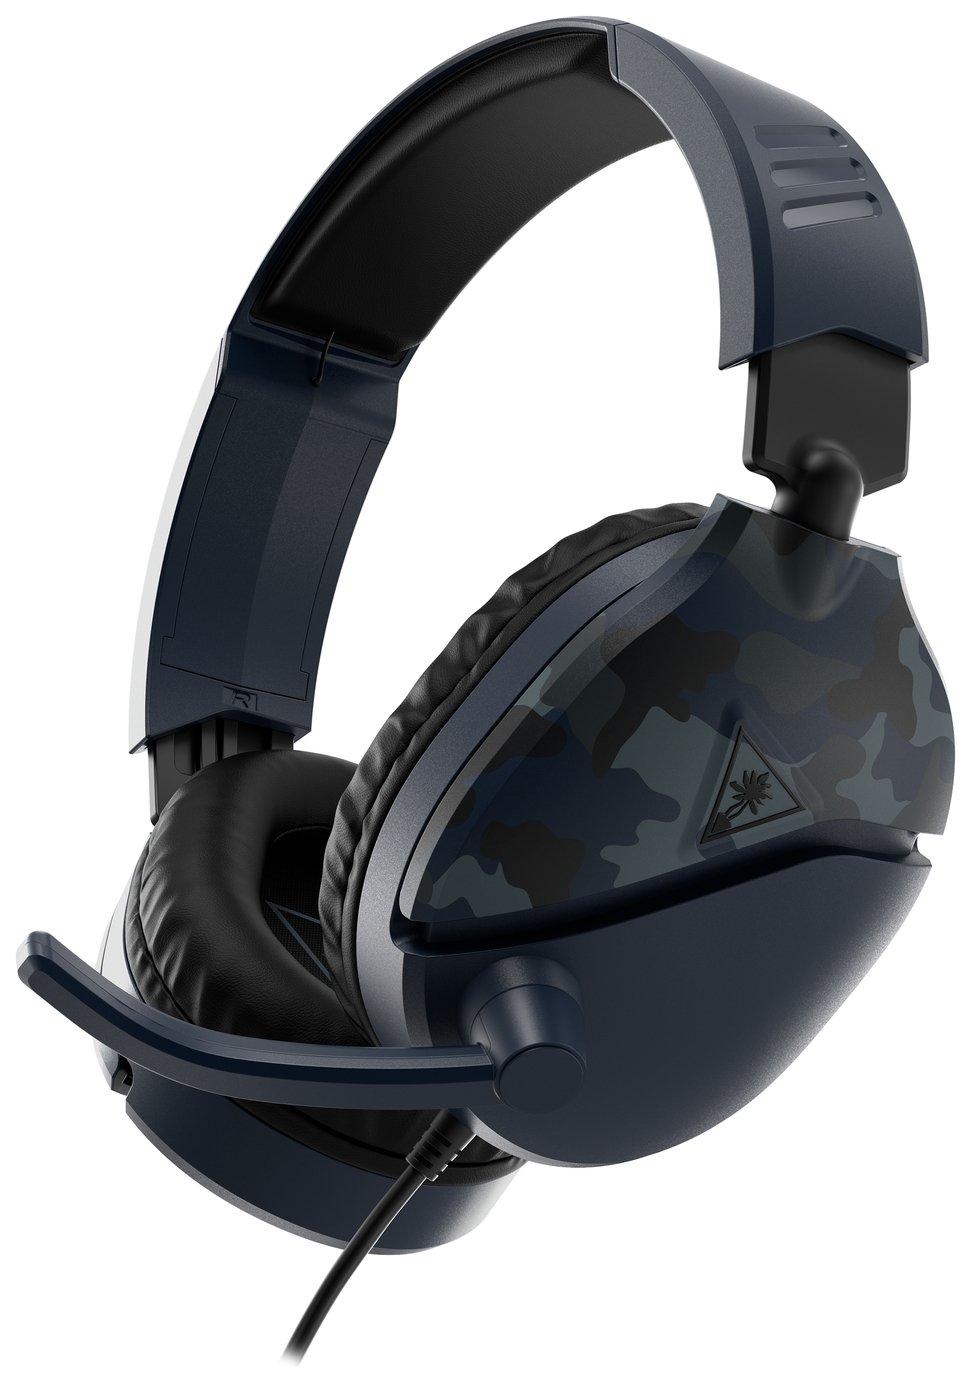 turtle beach recon 70p mic not working ps4